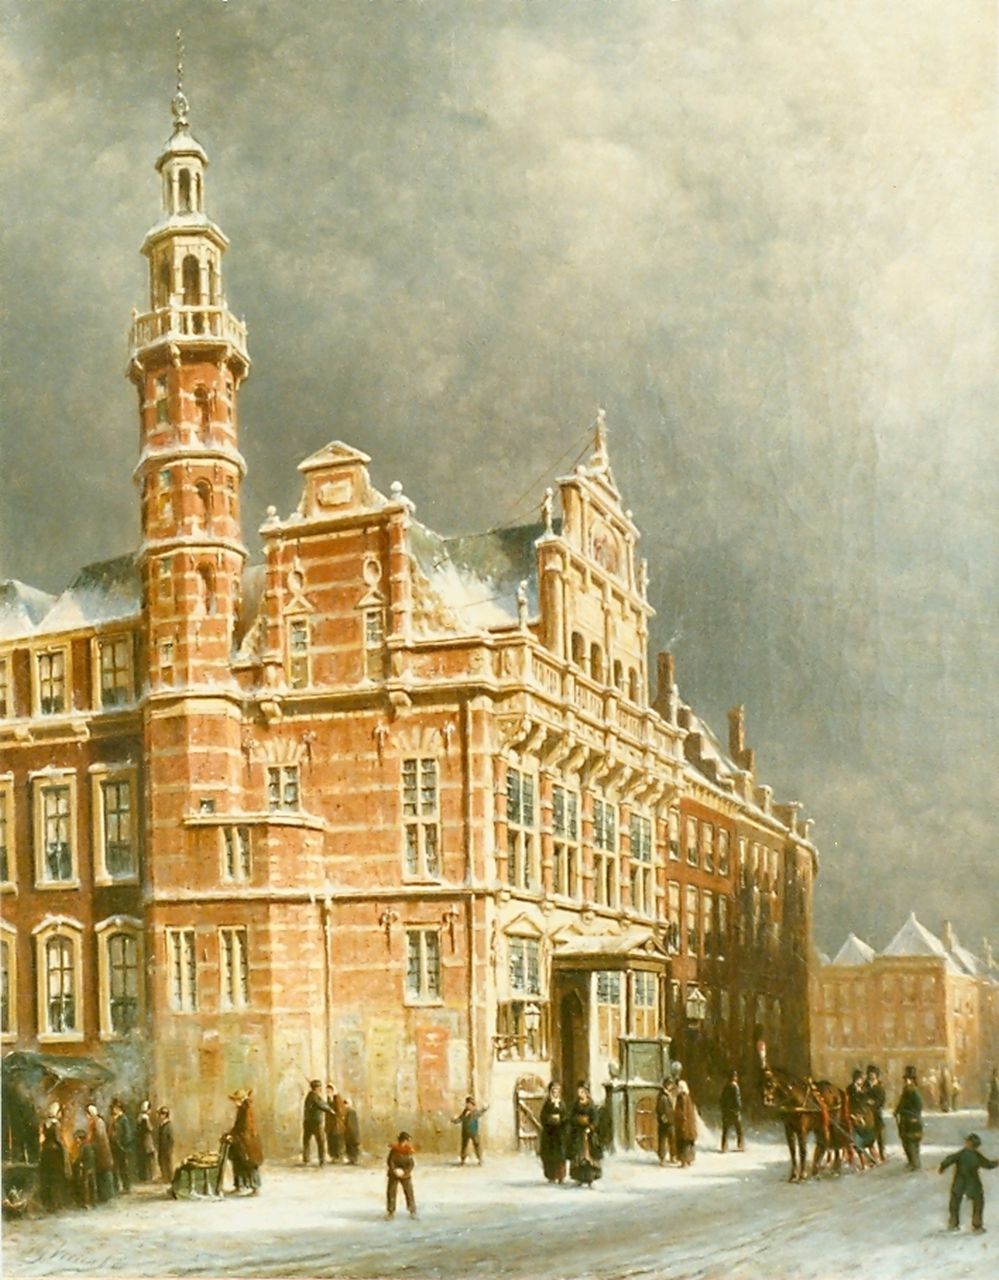 Vertin P.G.  | Petrus Gerardus Vertin, Townhall in winter, The Hague, oil on canvas 62.5 x 50.5 cm, signed l.l. and dated '80